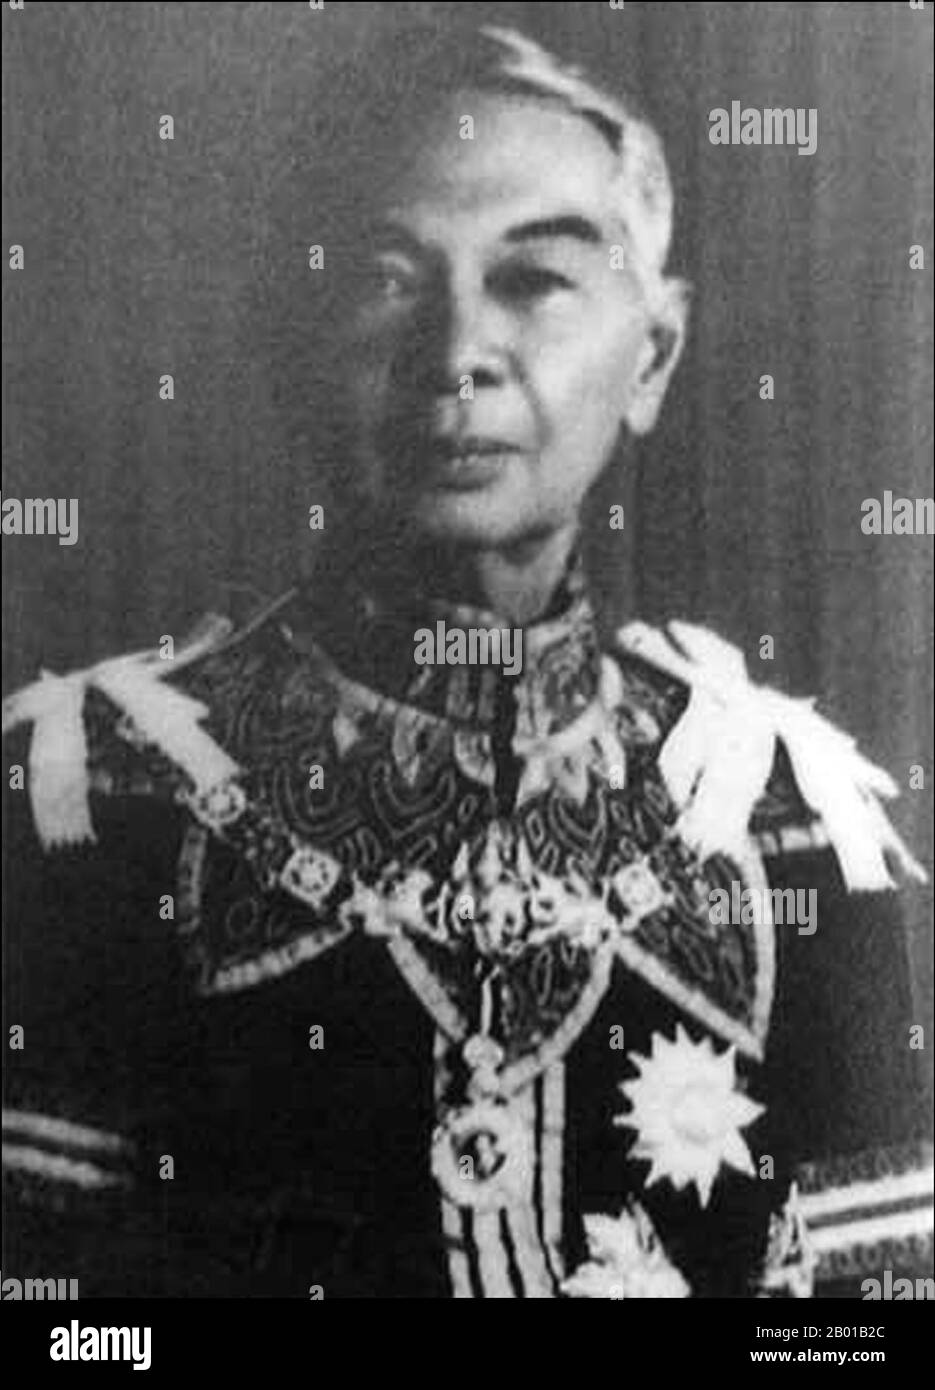 Thailand: Mom Rajawongse Seni Pramoj (26 May 1905 - 28 July 1997), Prime Minister of Thailand (r. 1945-1946; 15 February 1975 - 13 March 1975; 20 April 1976 - 6 October 1976), c. 1960s.  Mom Rajawongse Seni Pramoj was Prime Minister three times and a politician in the Democrat Party. A member of the Thai royal family, he was a descendant of King Rama II.  Seni's final term was a time of crisis in the nation. A rightwing backlash against leftist student demonstrators culminated in the Thammasat University massacre on 6 October 1976, and the military forced him out of office. Stock Photo